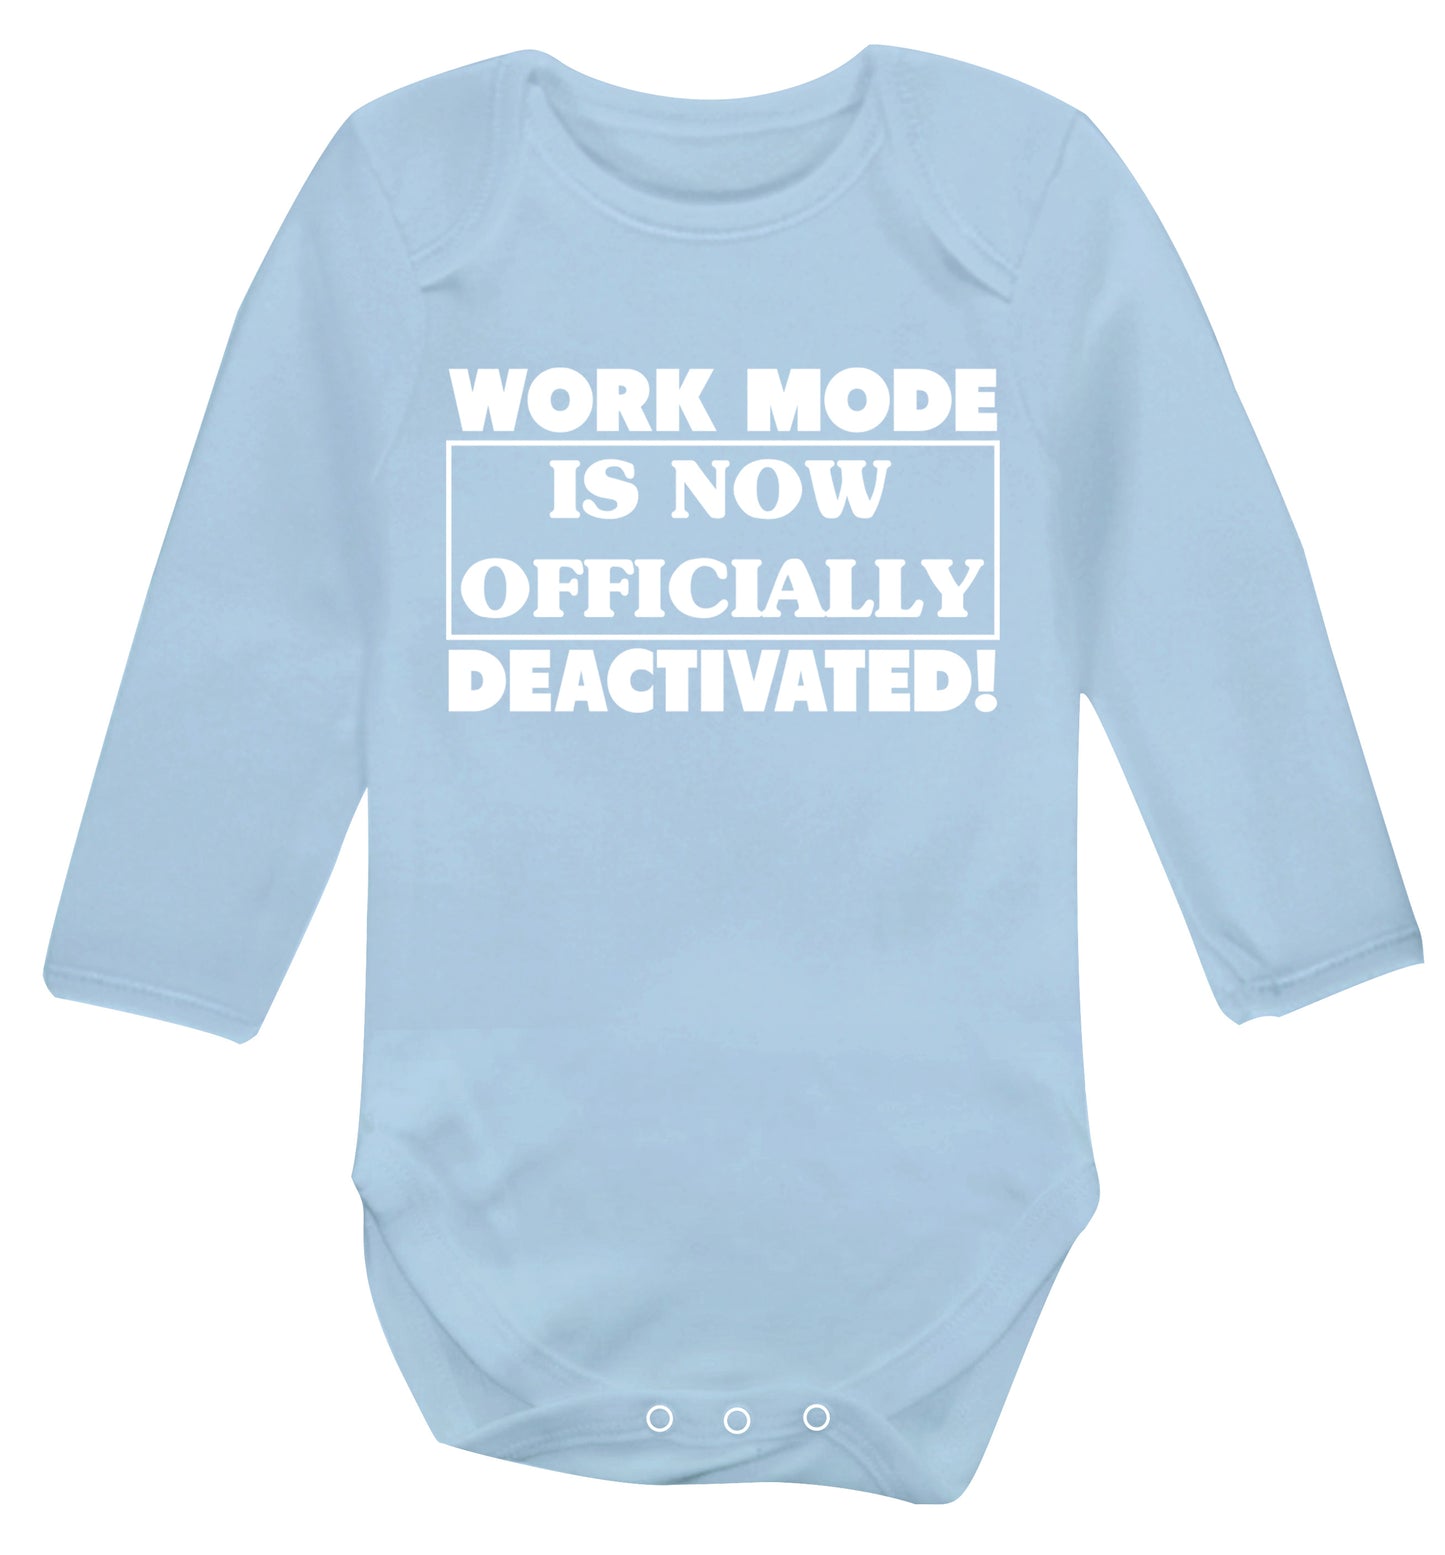 Work mode is now officially deactivated Baby Vest long sleeved pale blue 6-12 months